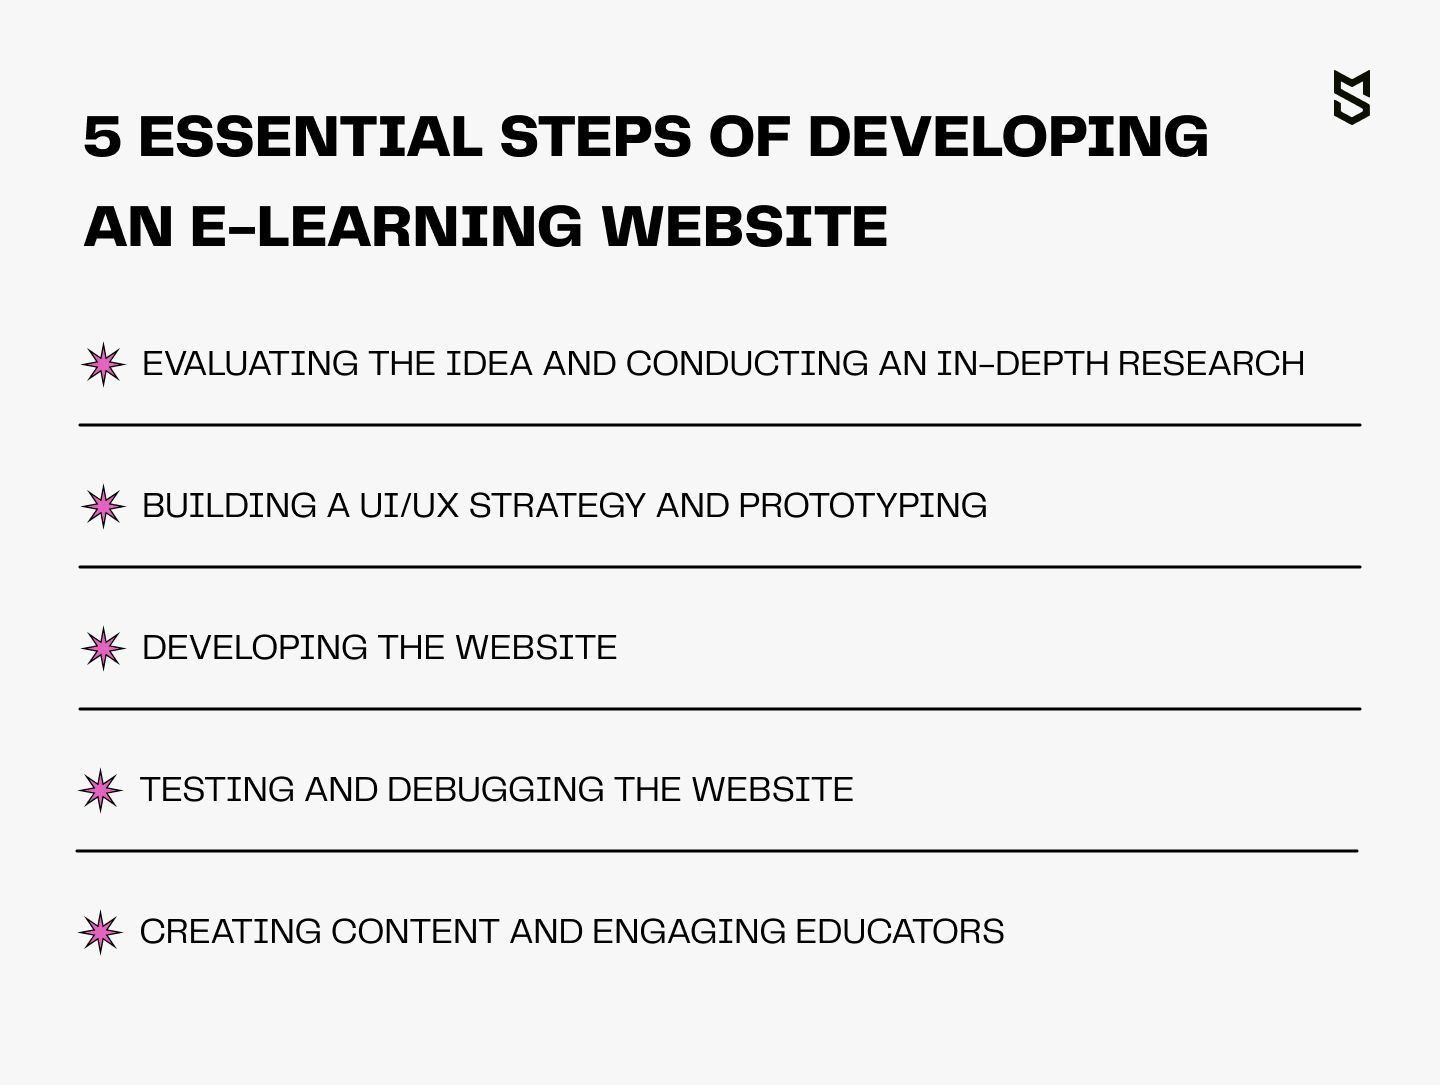 5 essential steps of developing an e-learning website